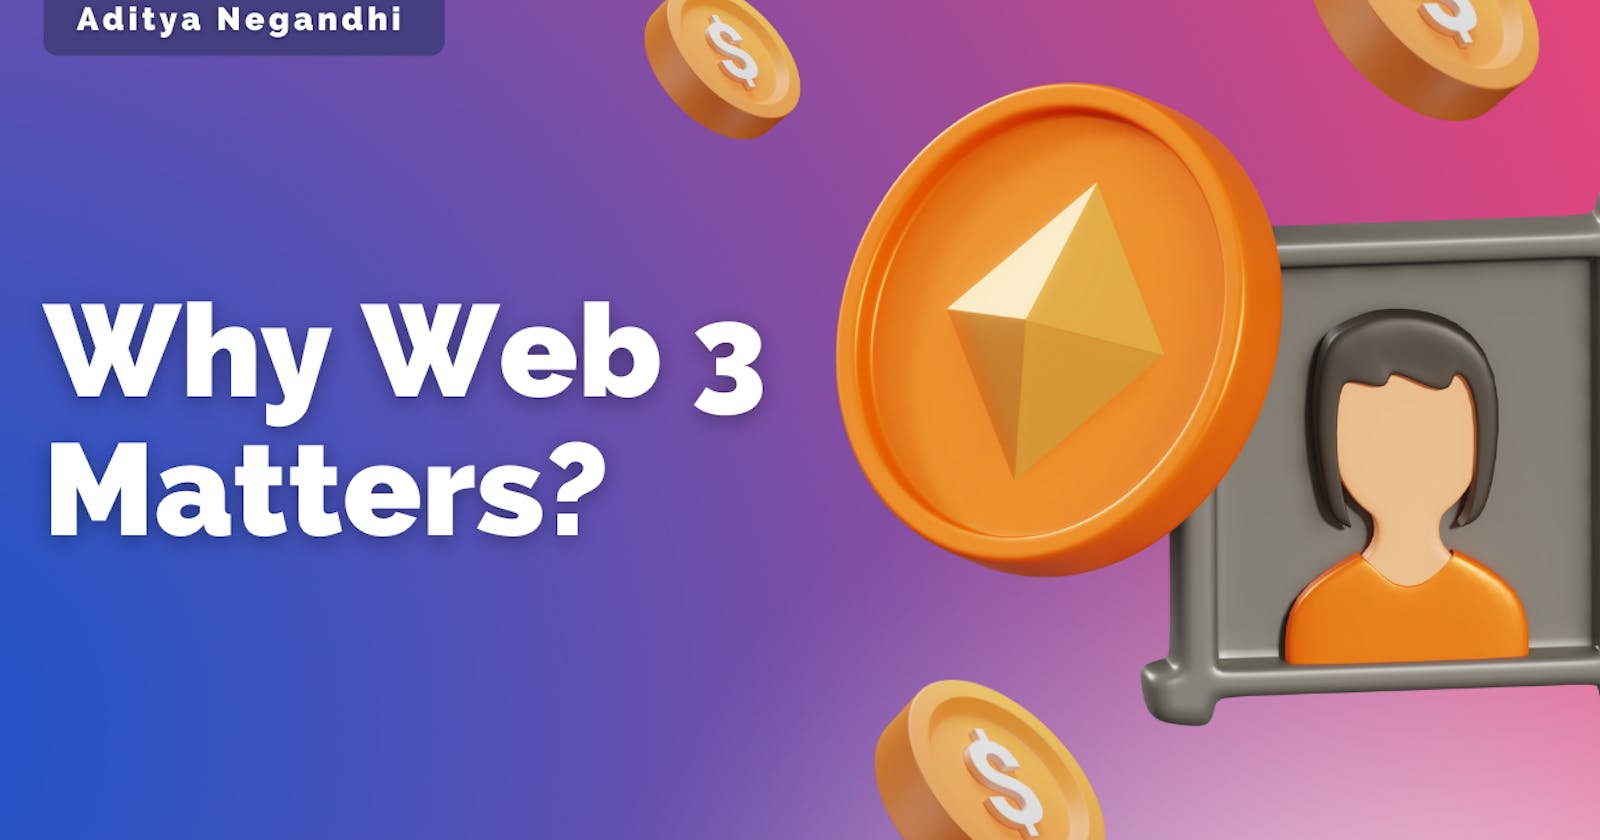 Why Web 3 Matters (what’s the need for a new web)?